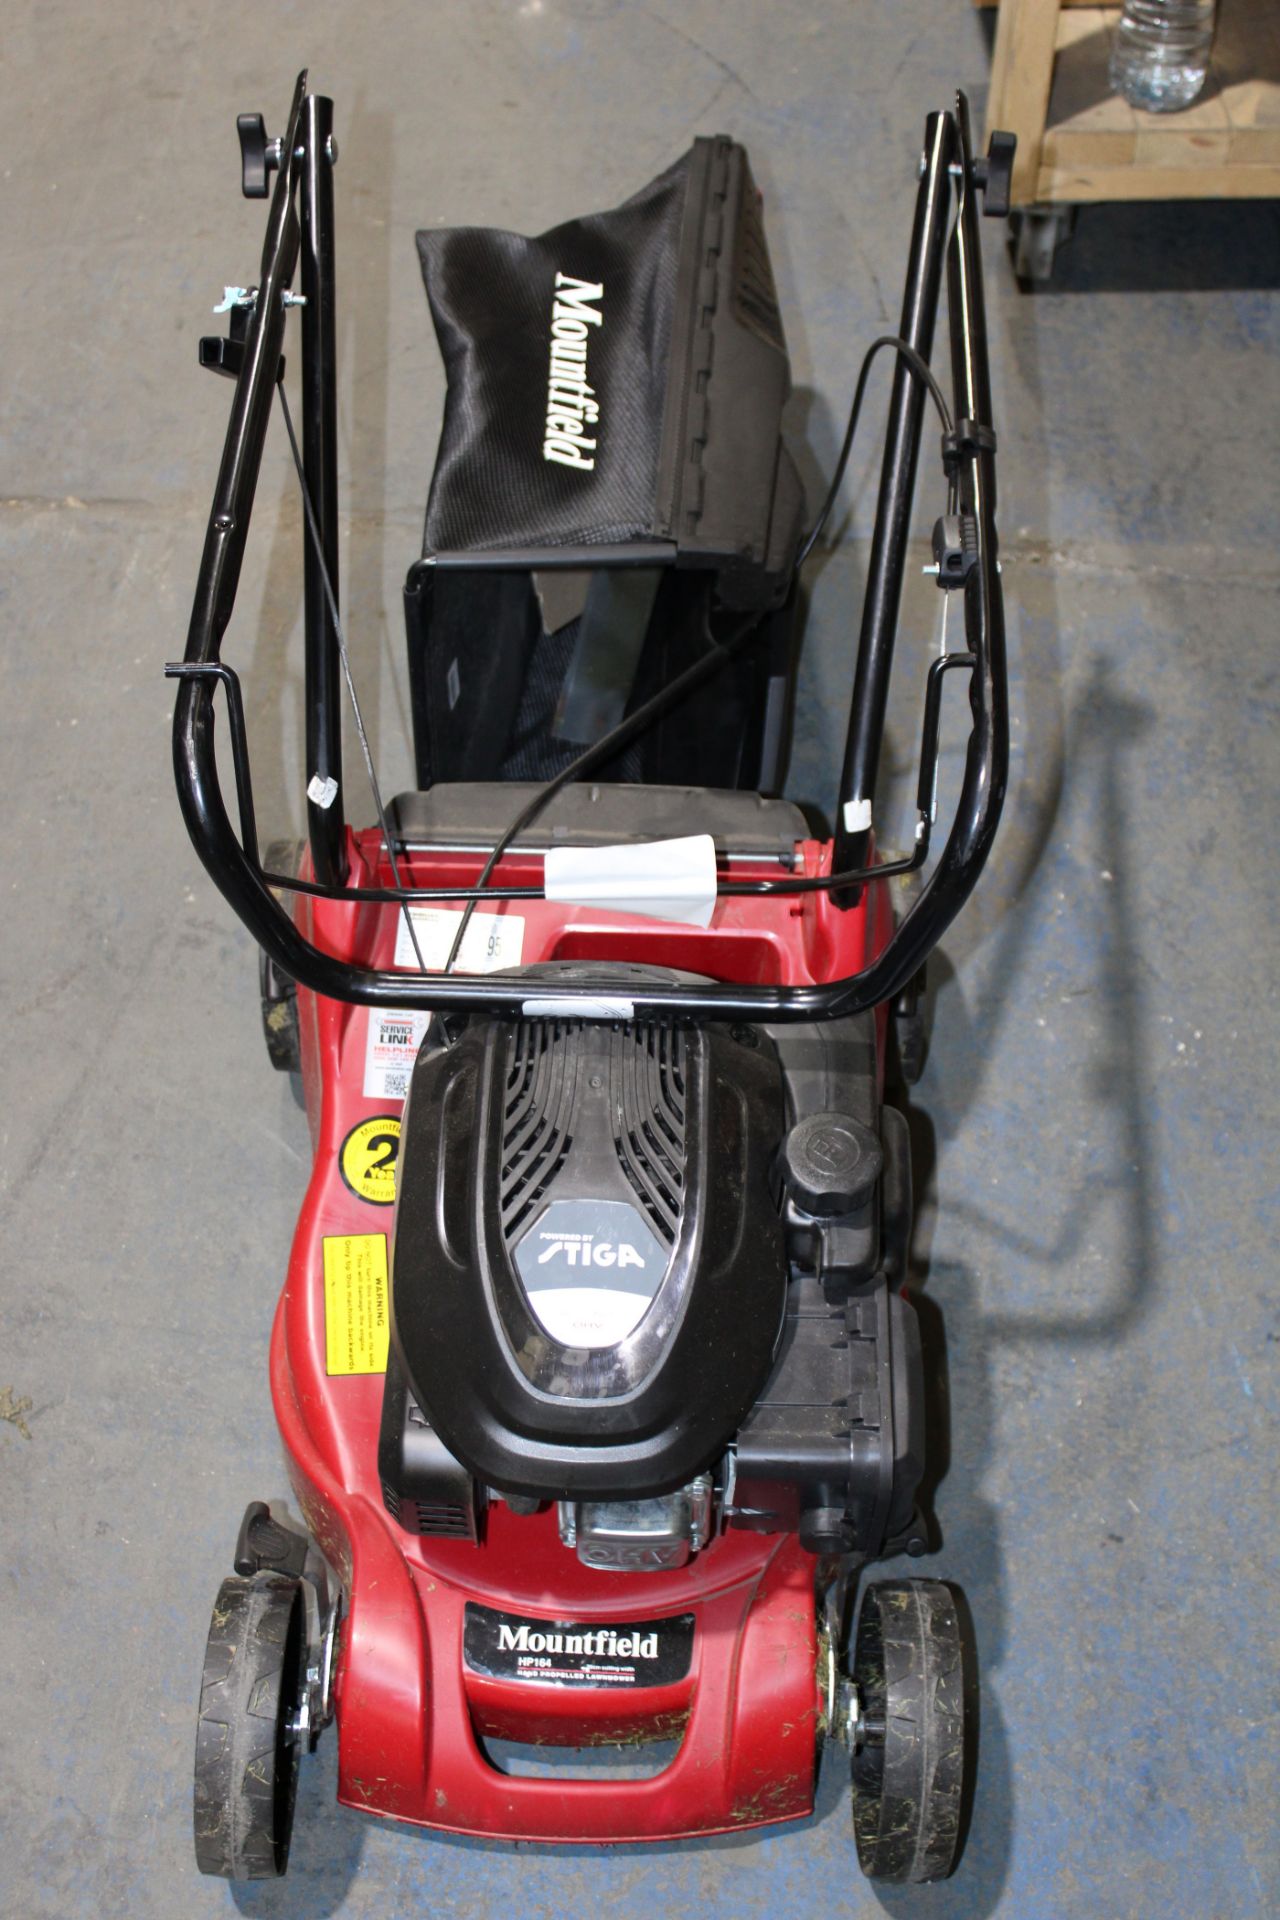 MOUNTFIELD HP164 PETROL LAWNMOWER £202.40Condition ReportAppraisal Available on Request- All Items